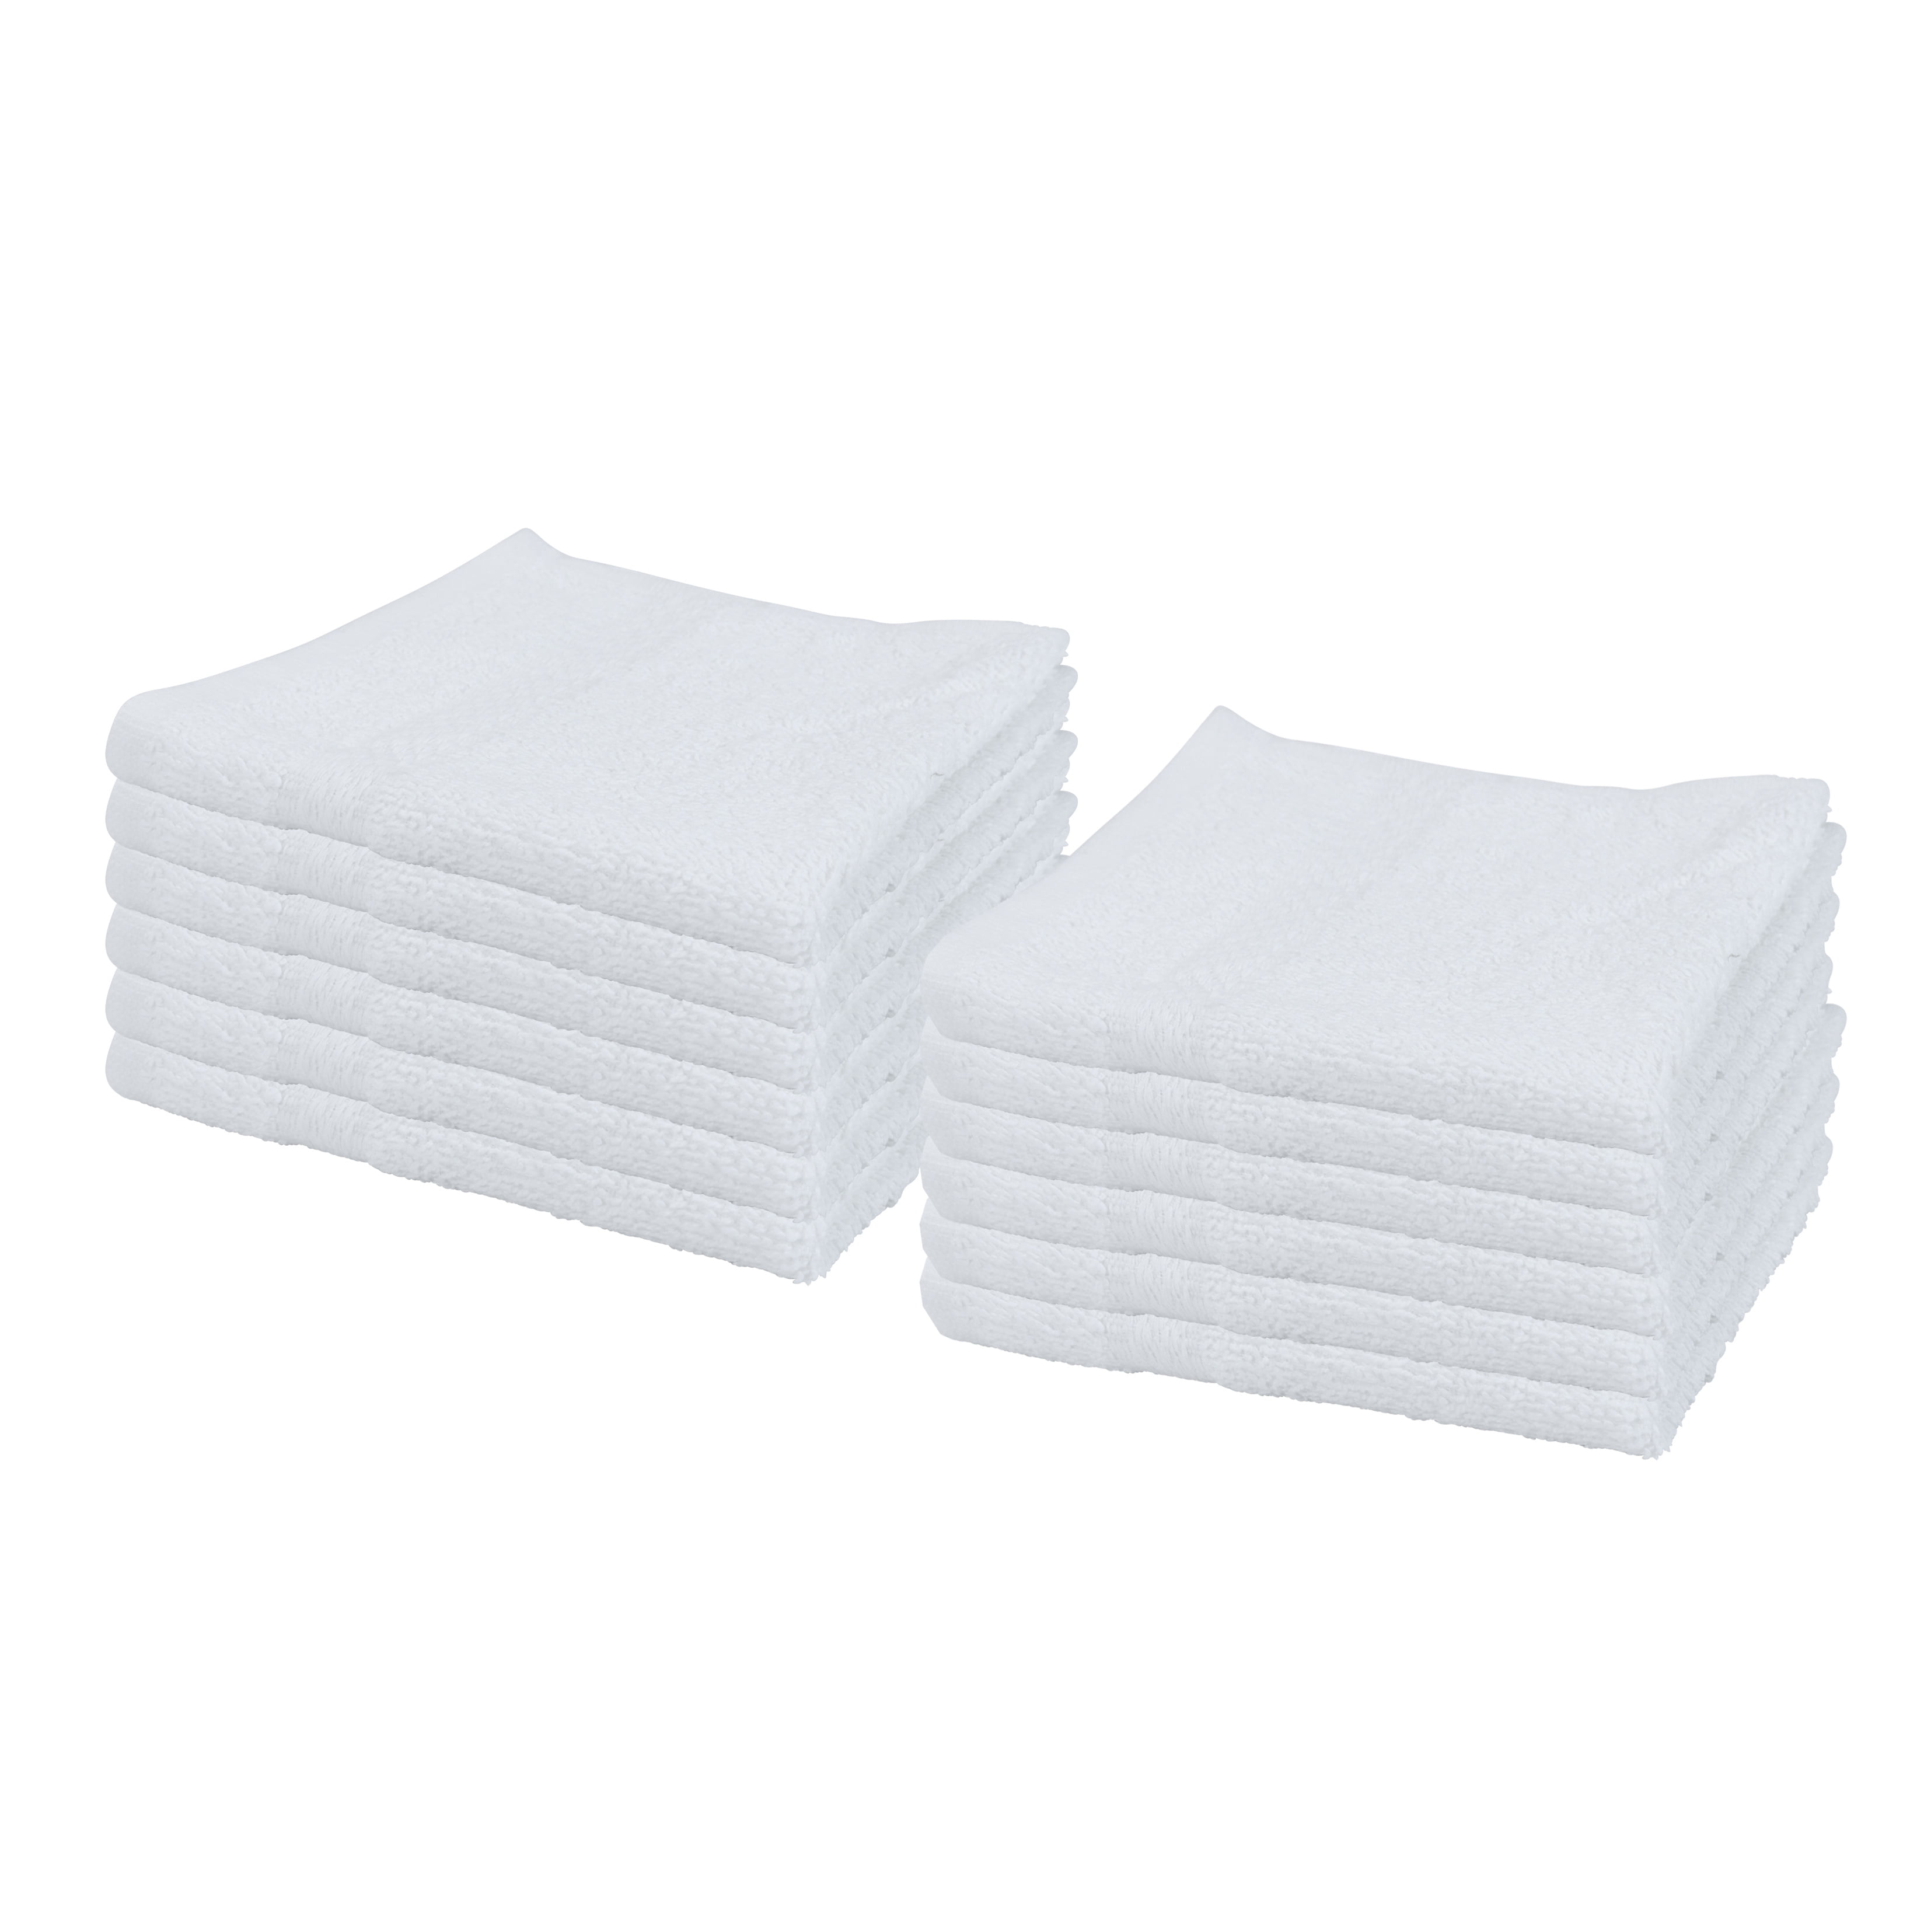 White 12x12 Bulk Bathroom Cotton Towels Details about   12 Pack of Admiral Washcloths 